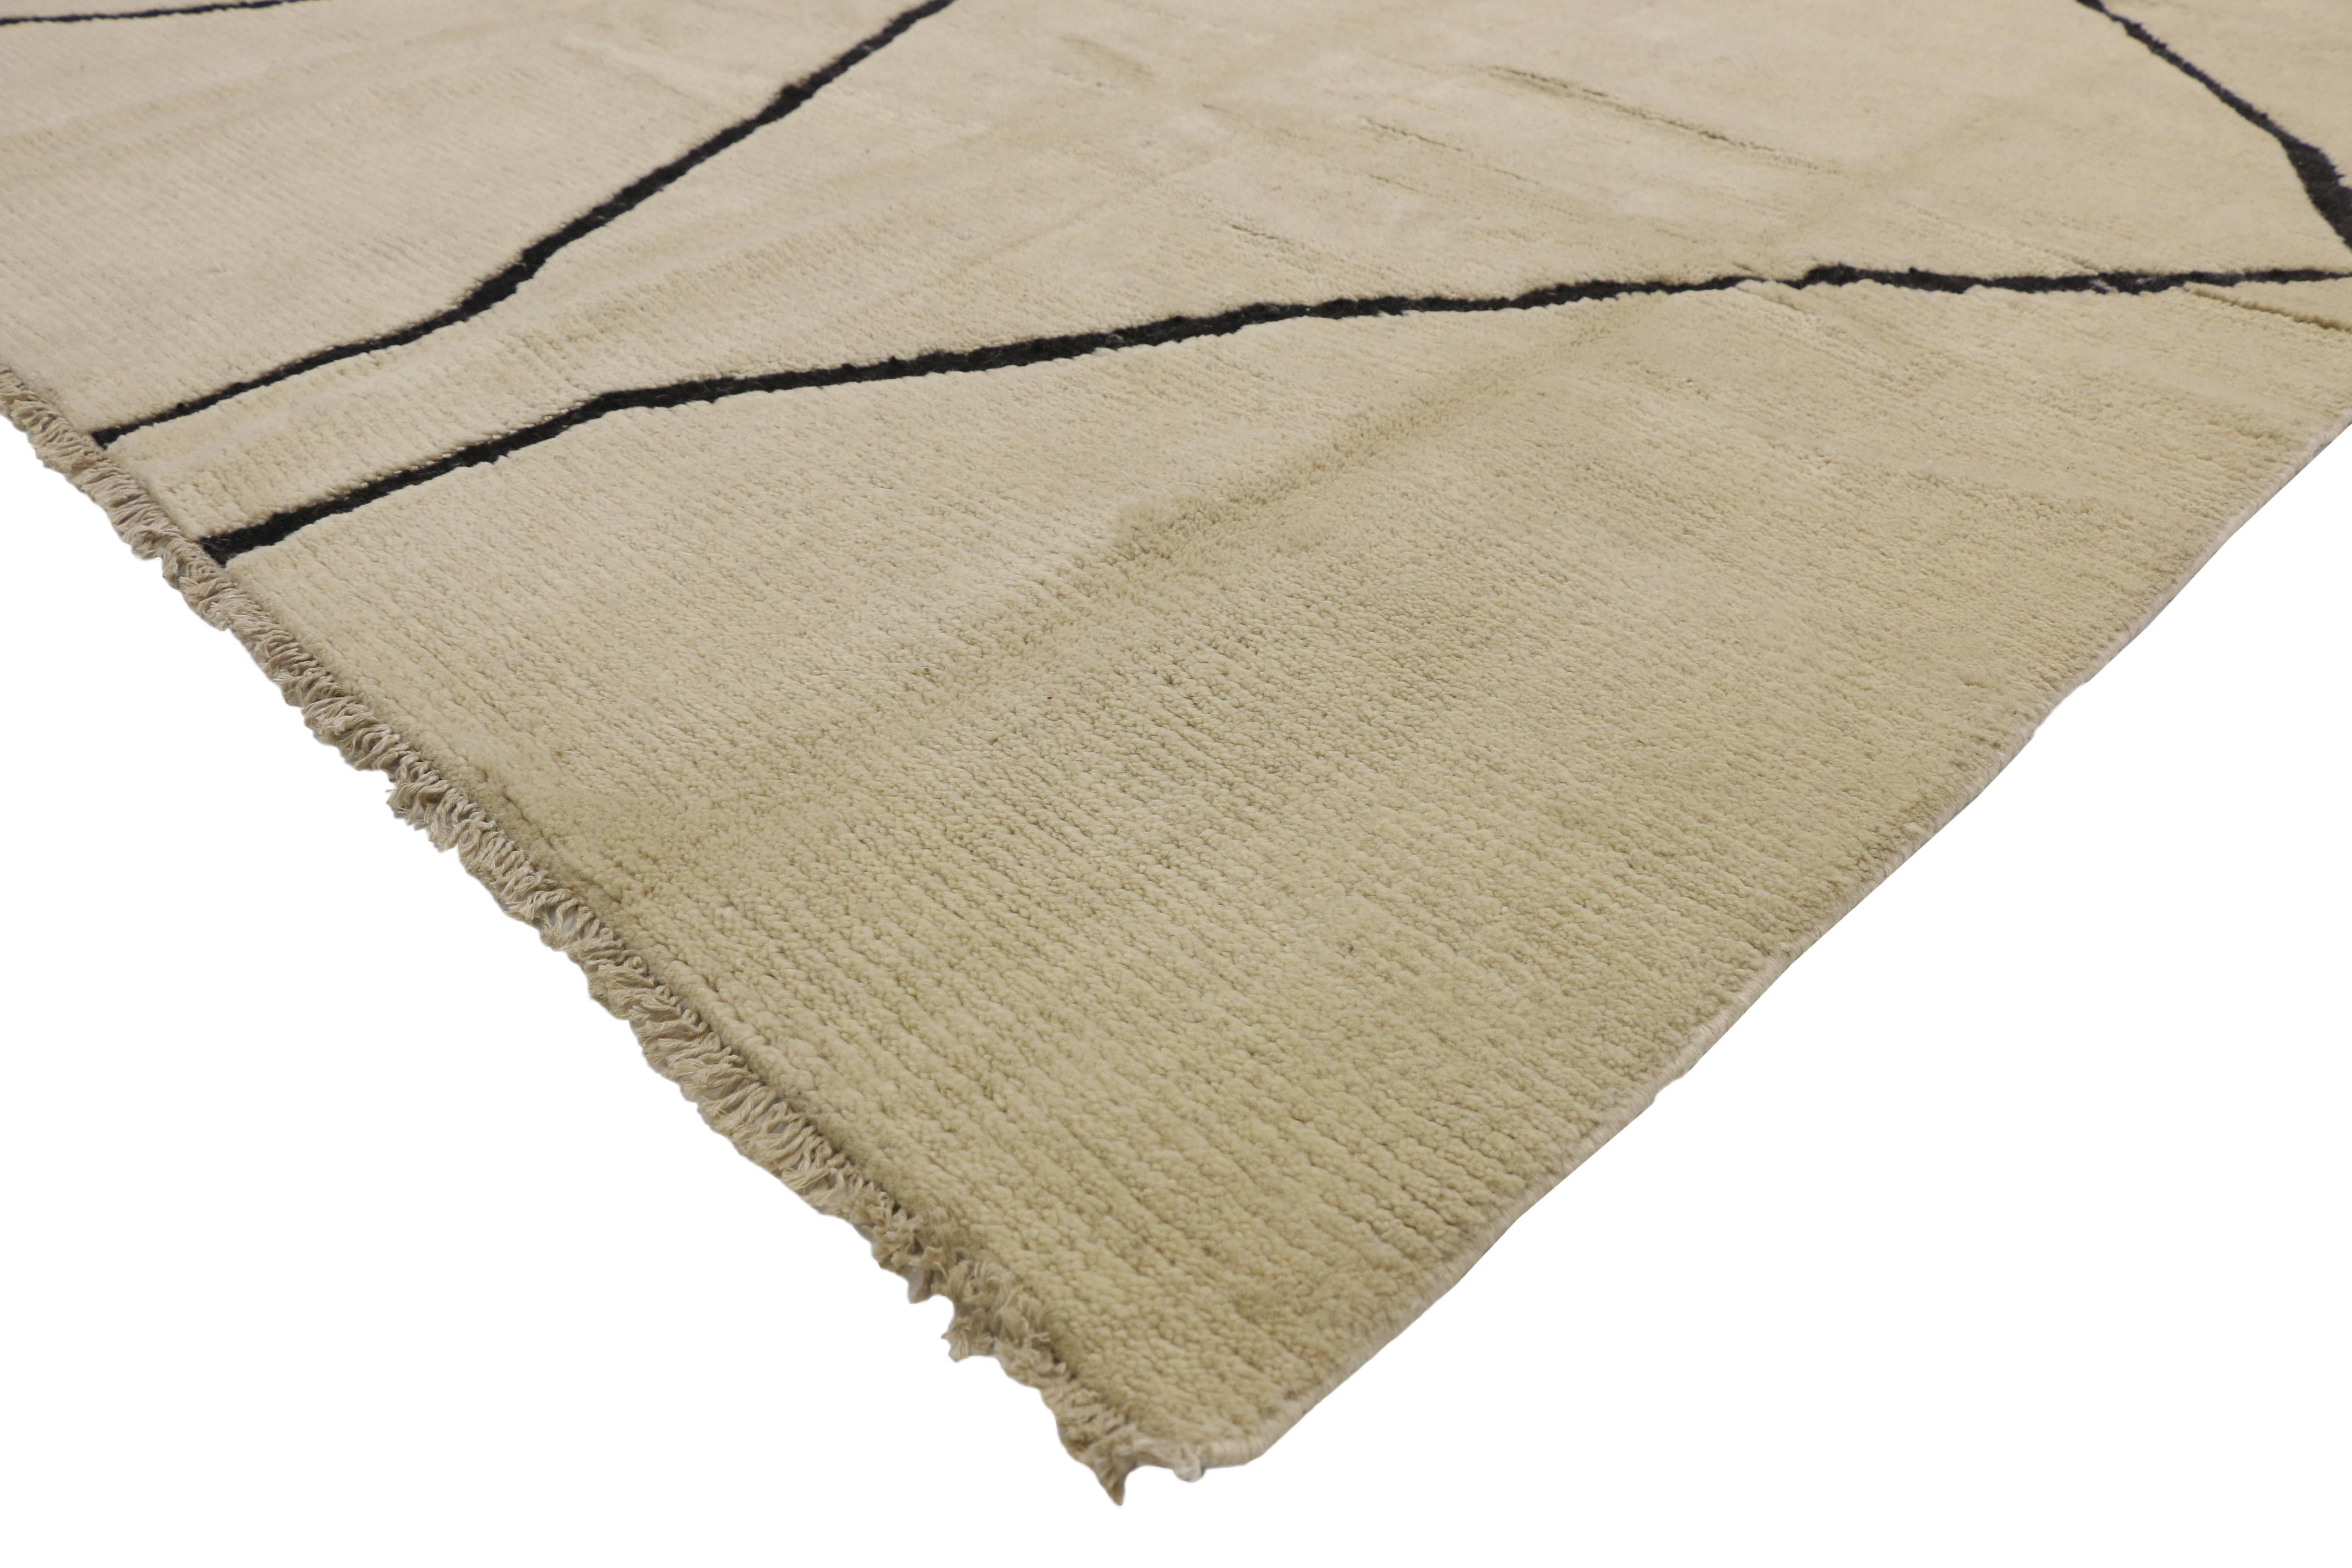 80507 New Contemporary Moroccan Area rug with Organic Modern style. This hand knotted wool contemporary Moroccan area rug features two columns of diamond lattices unfolding across the sides of an abrashed creamy-beige field. The zigzag lines come